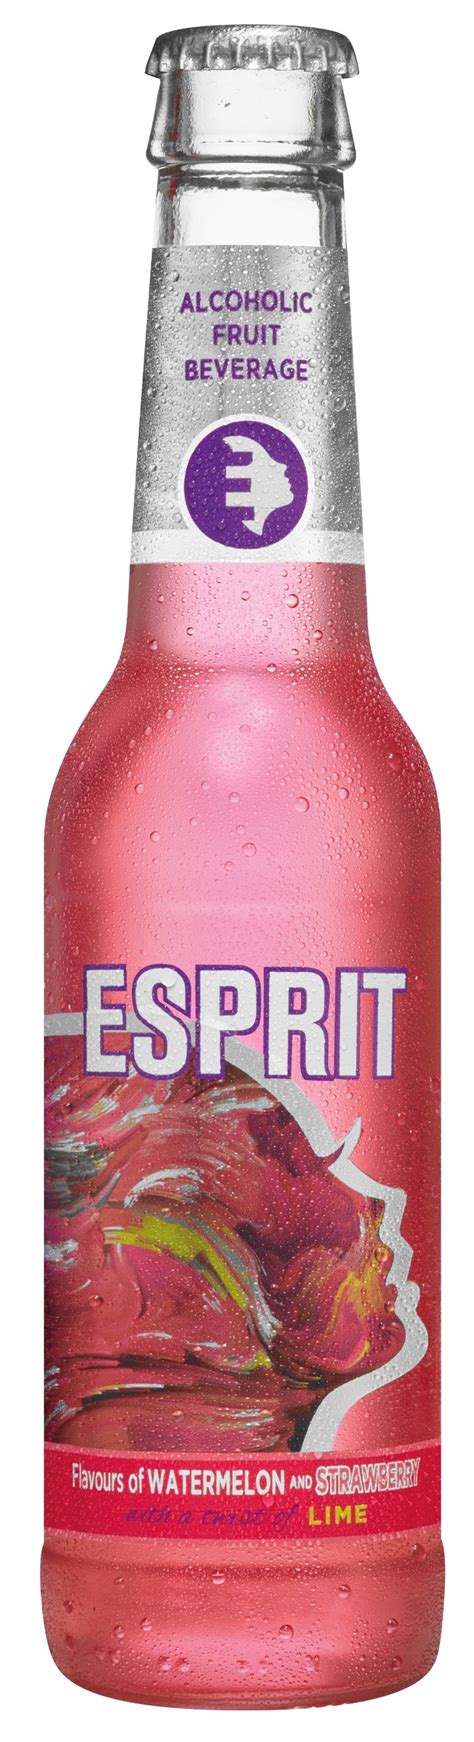 what is an esprit